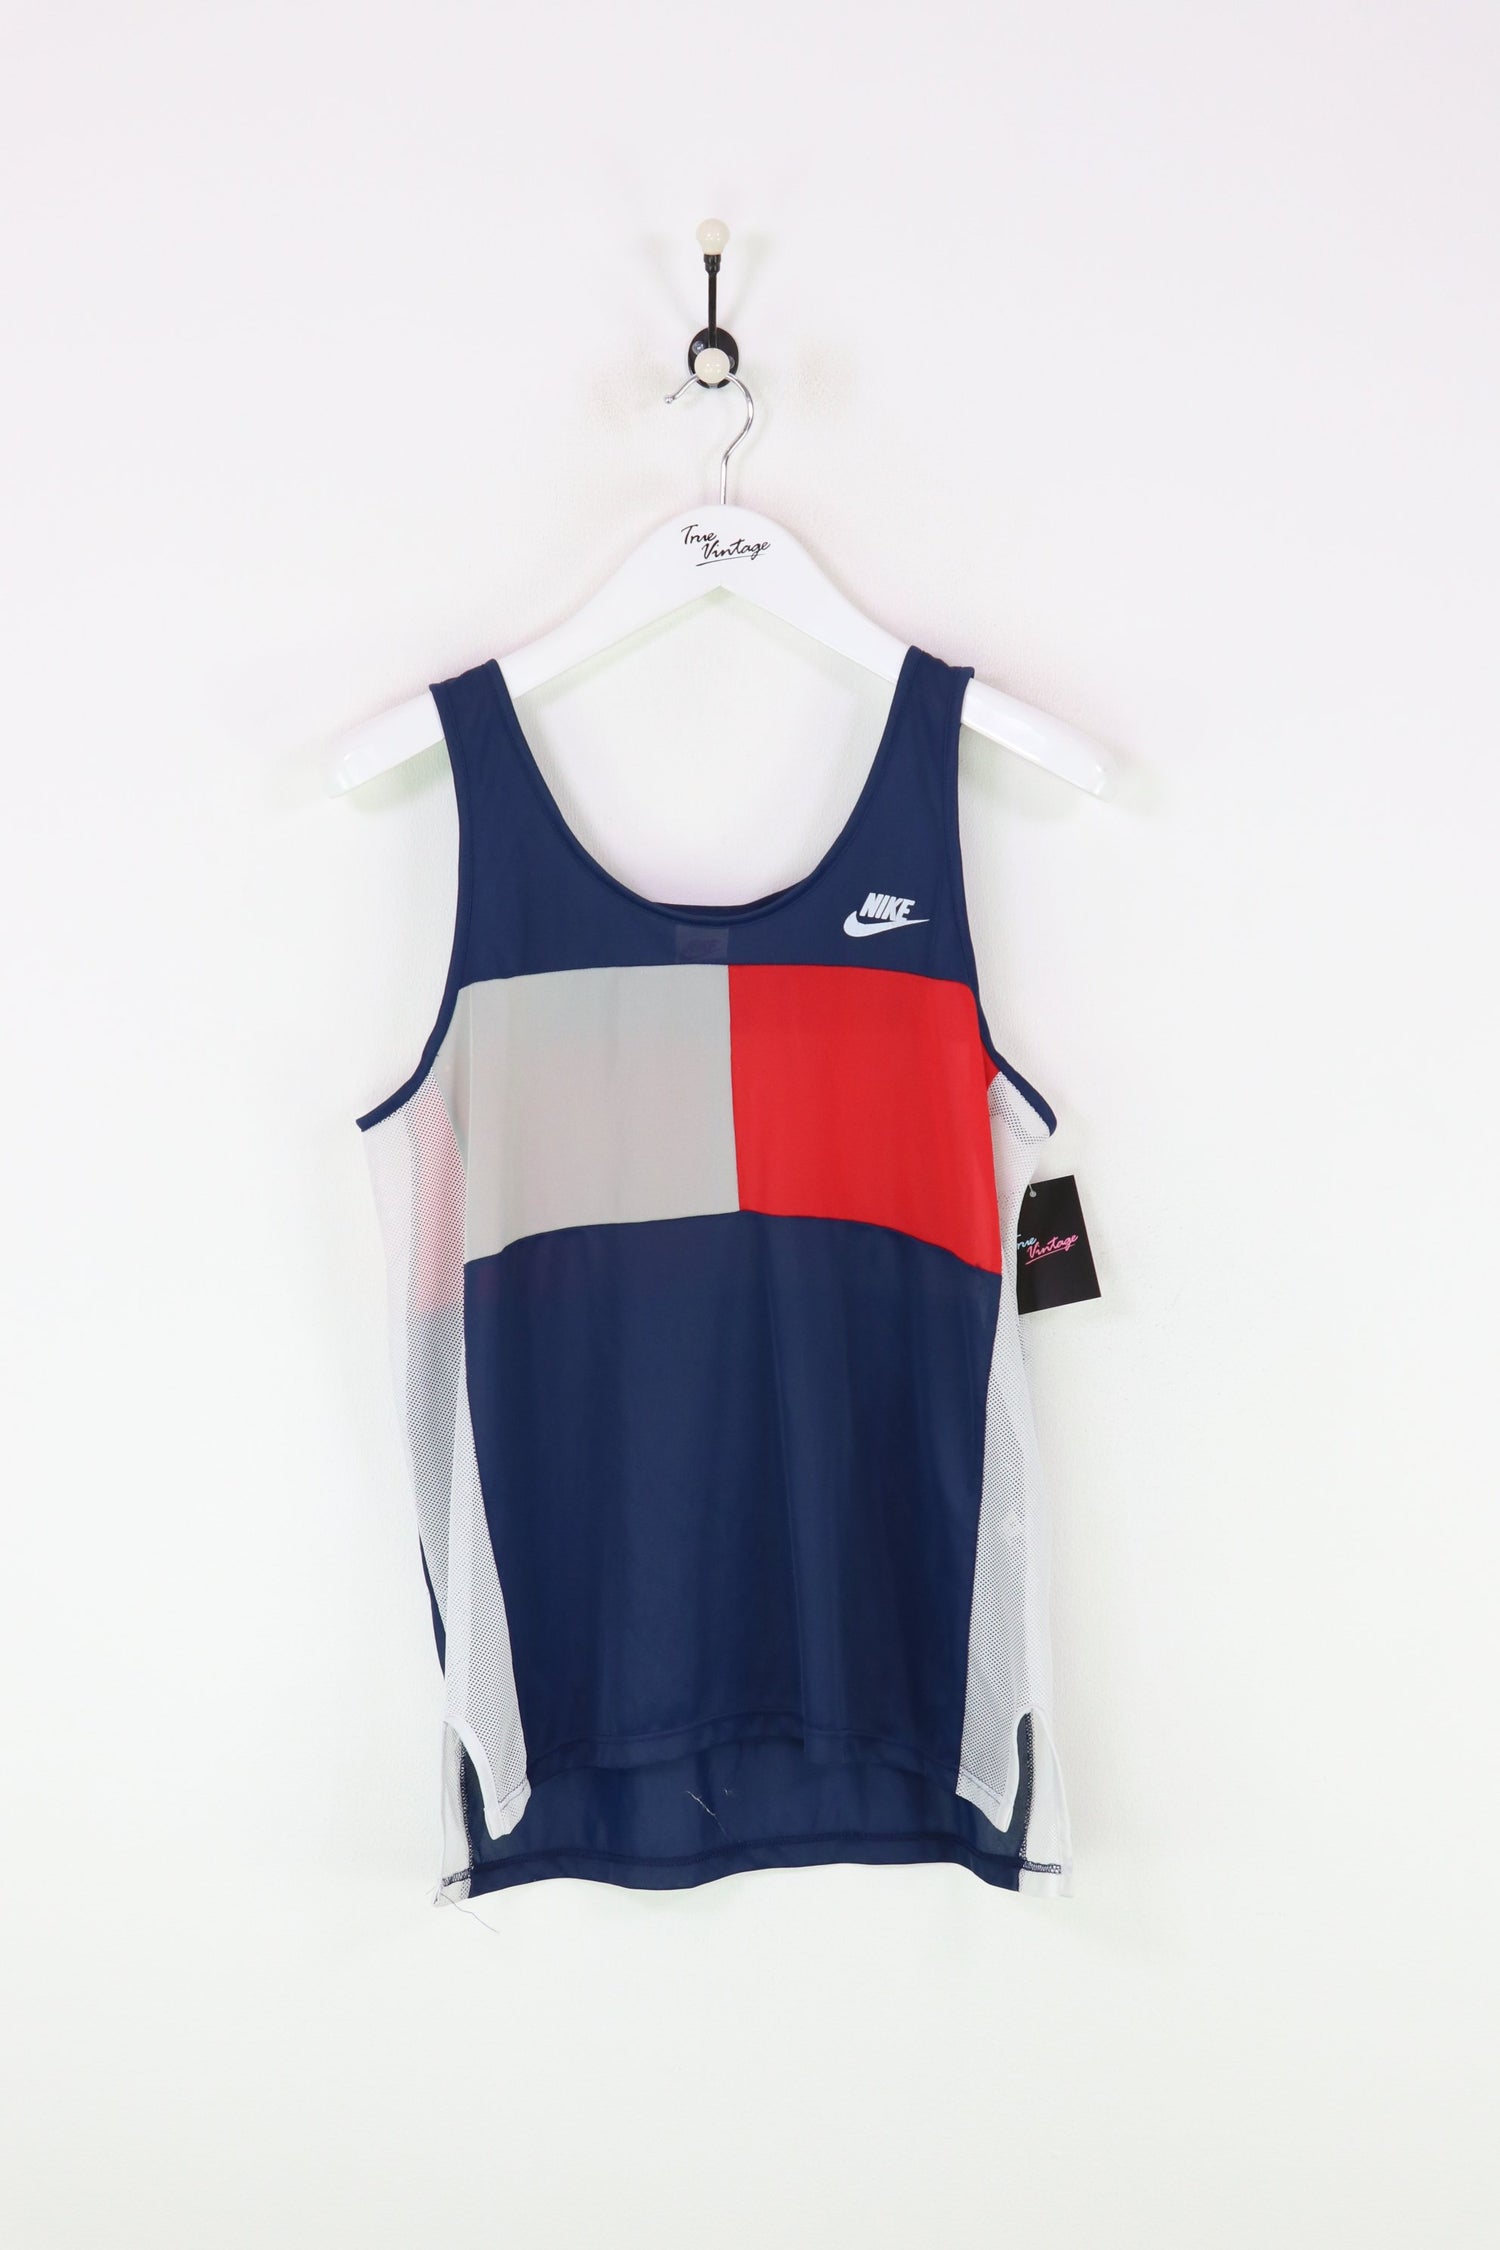 Nike Vest Navy/Red Small